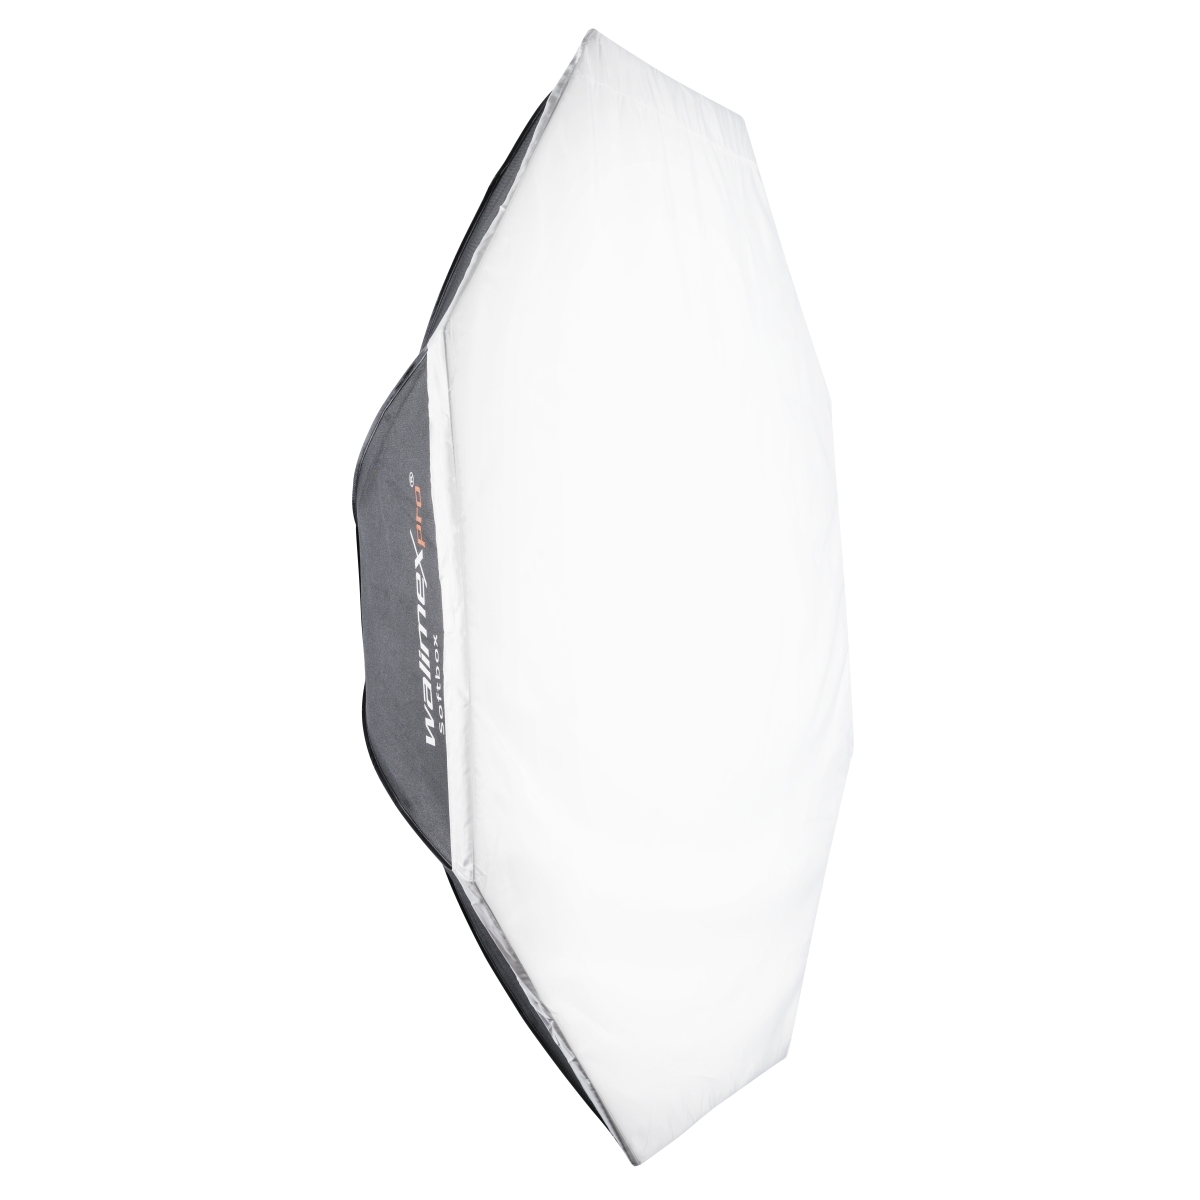 Walimex Octagon Softbox 140cm for Broncolor